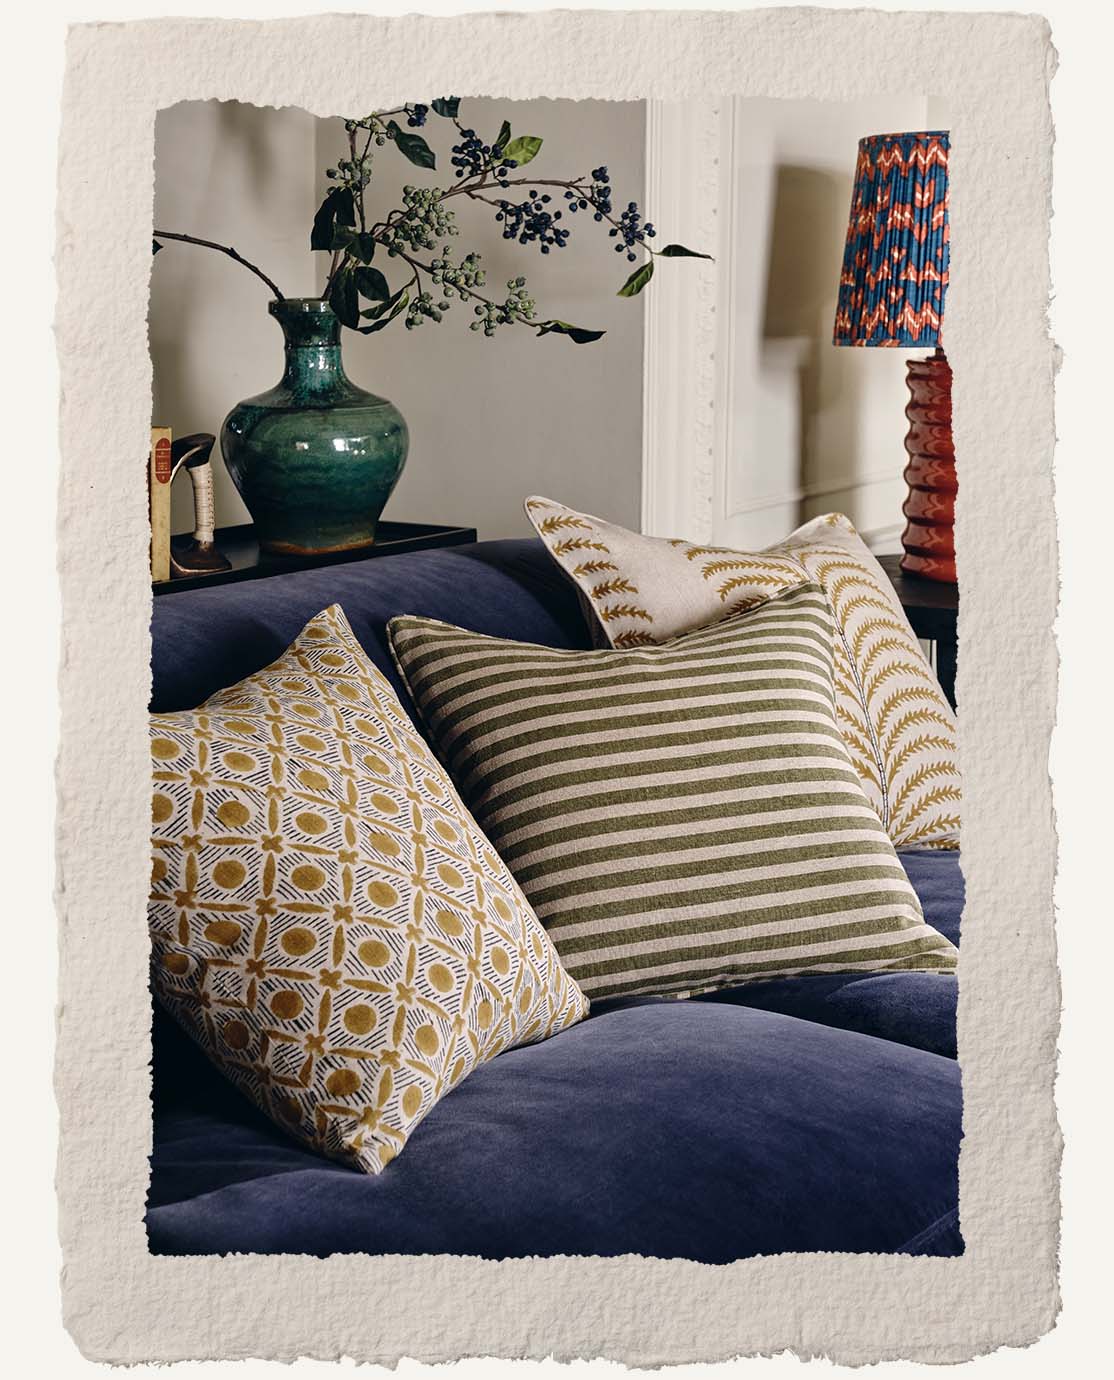 A close up of a blue velvet sofa decorated with patterned pillows in green and mustard yellow. In the background is a blue vase holding flowers.